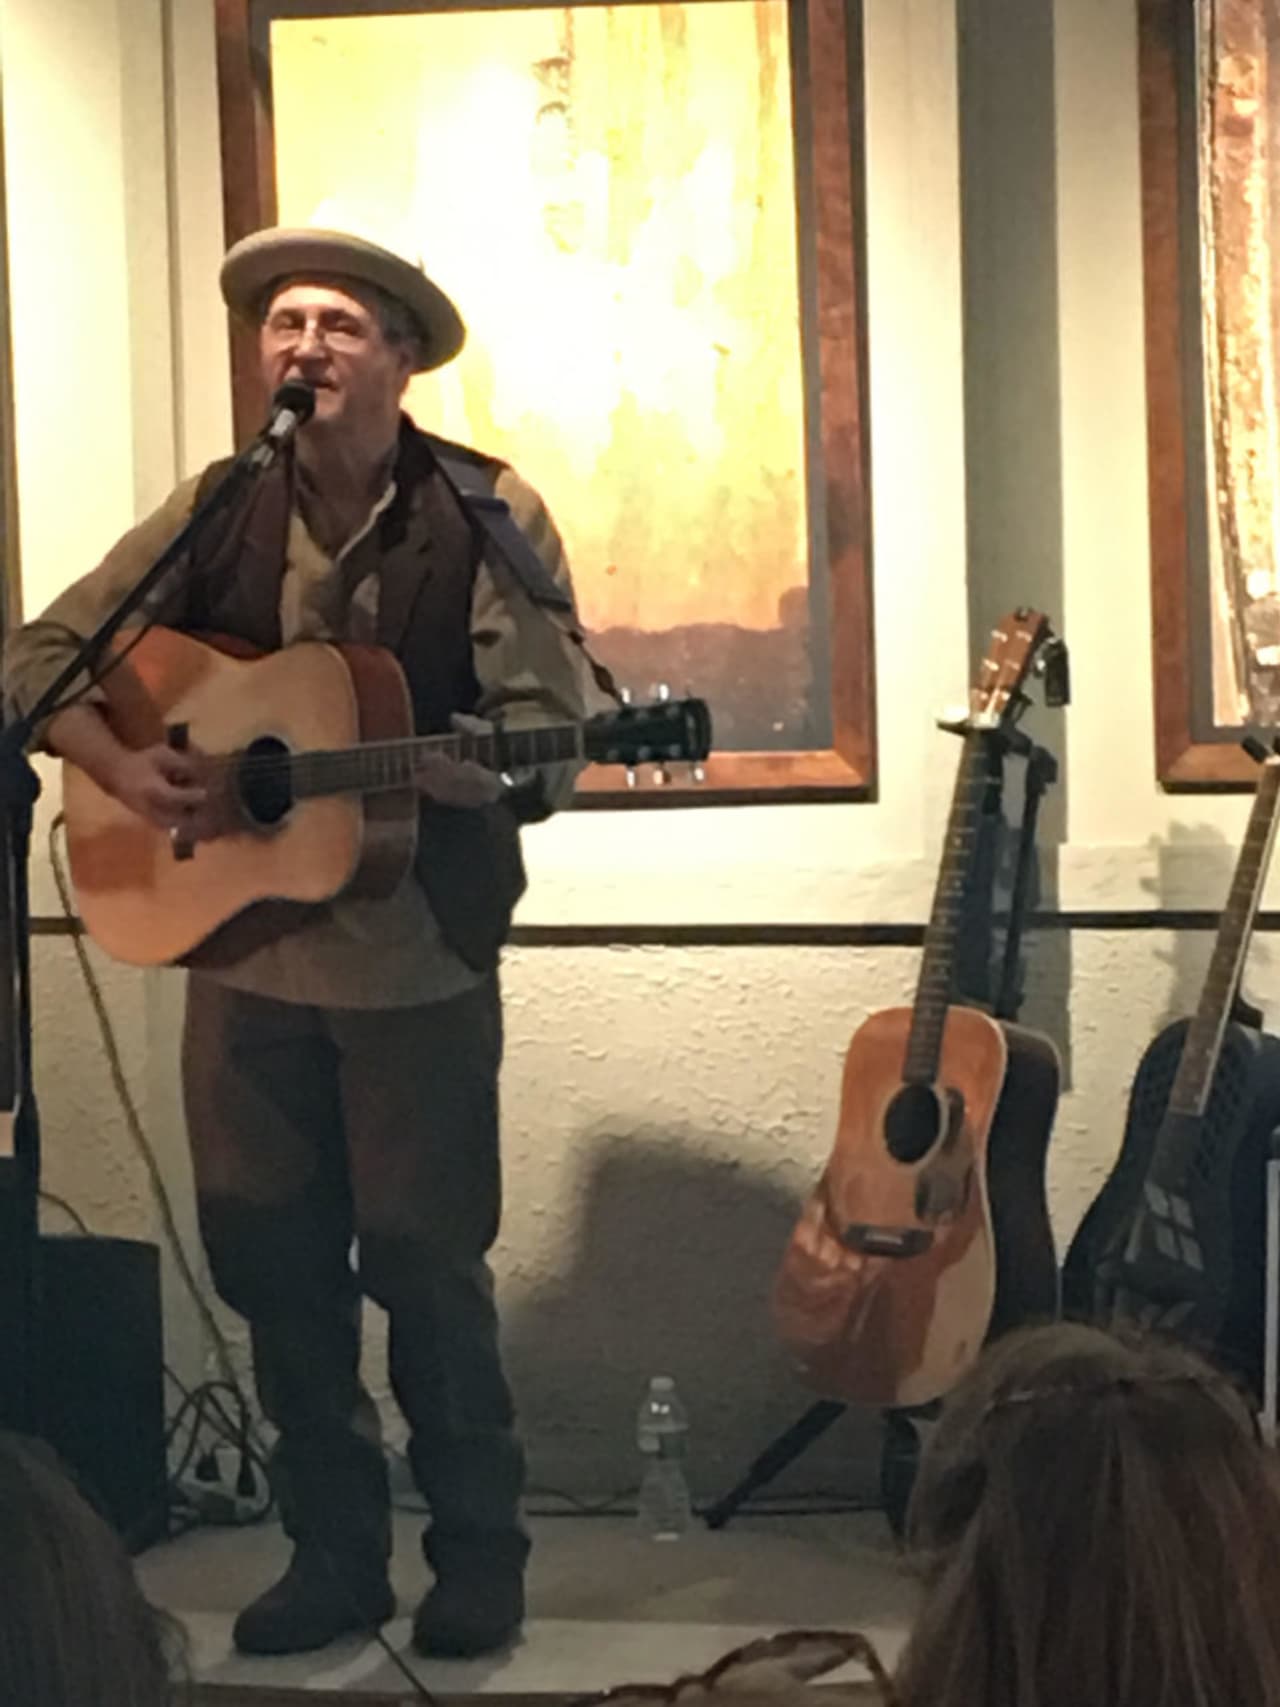 Blues musician Phil Dollard plays at a recent exhibit of photographs by Robert Olsson in Ossining.